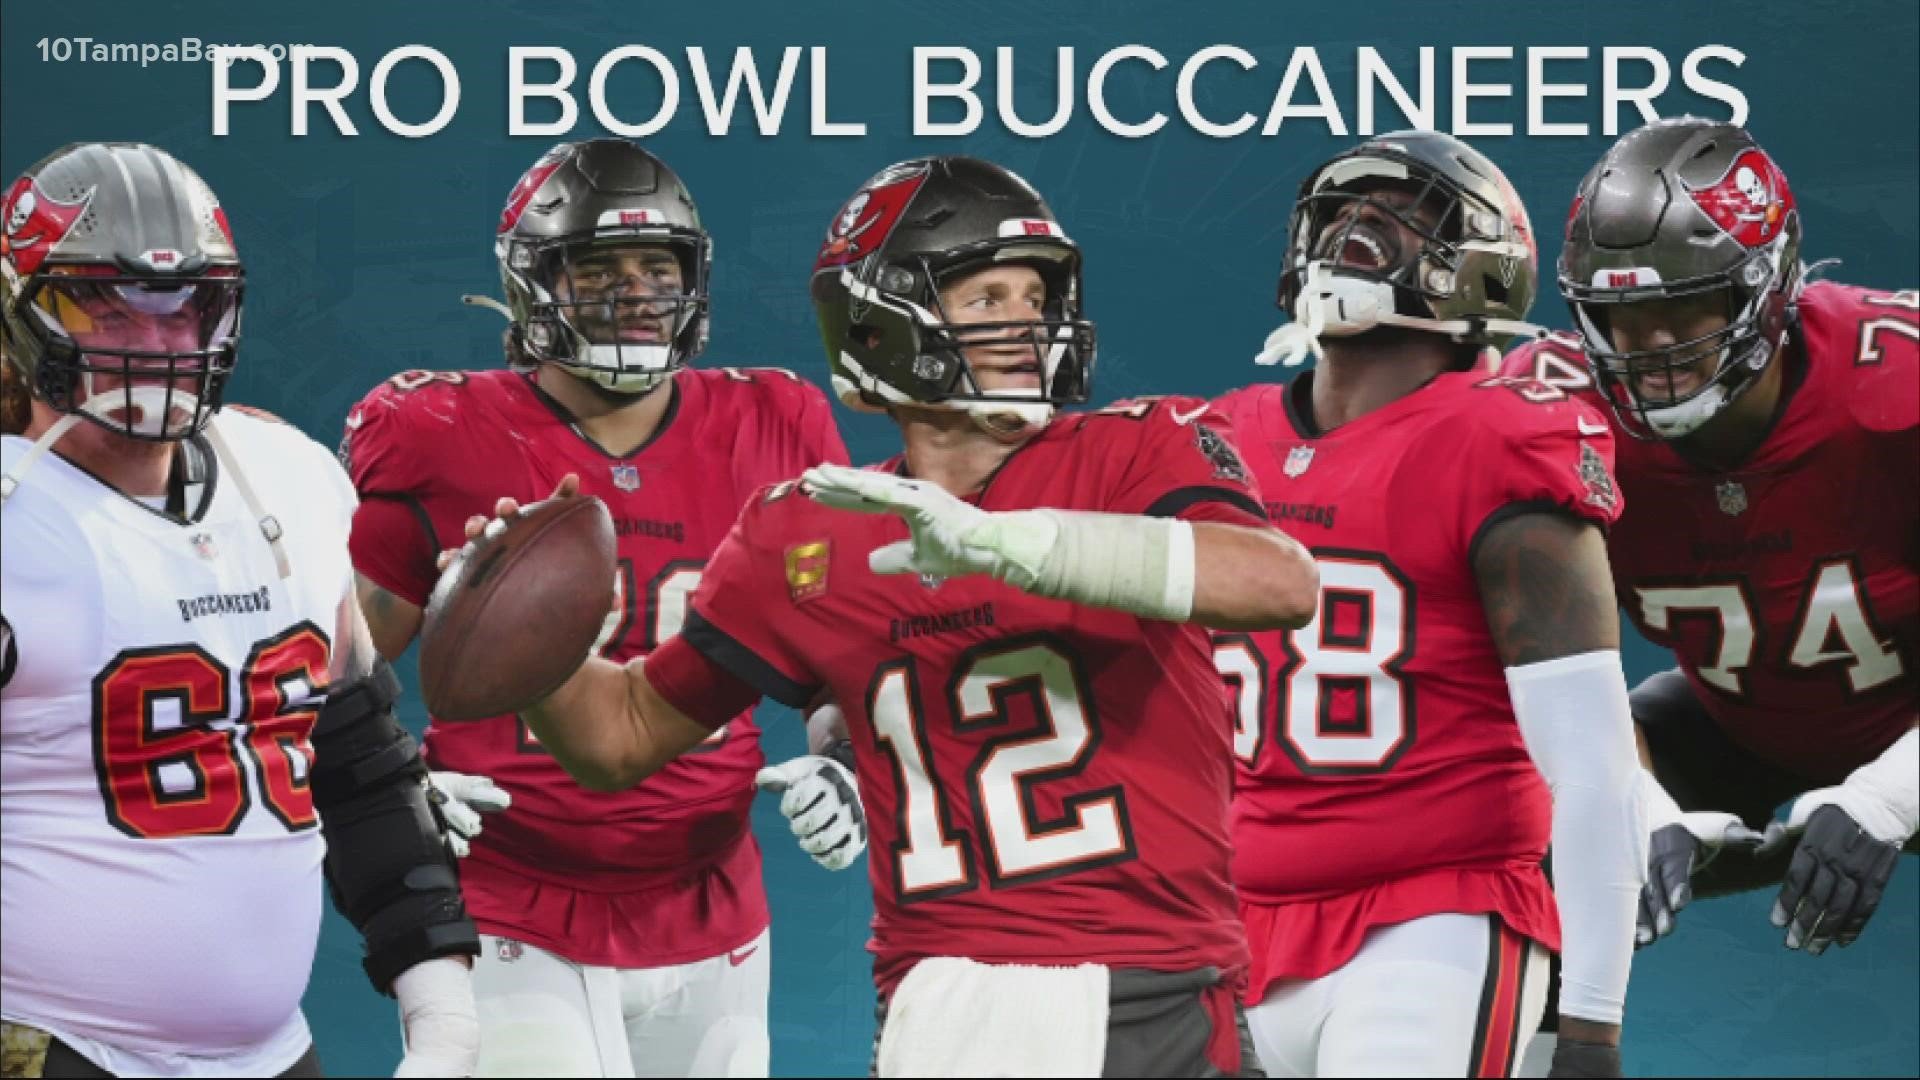 5 Buccaneers players named to 2022 Pro Bowl